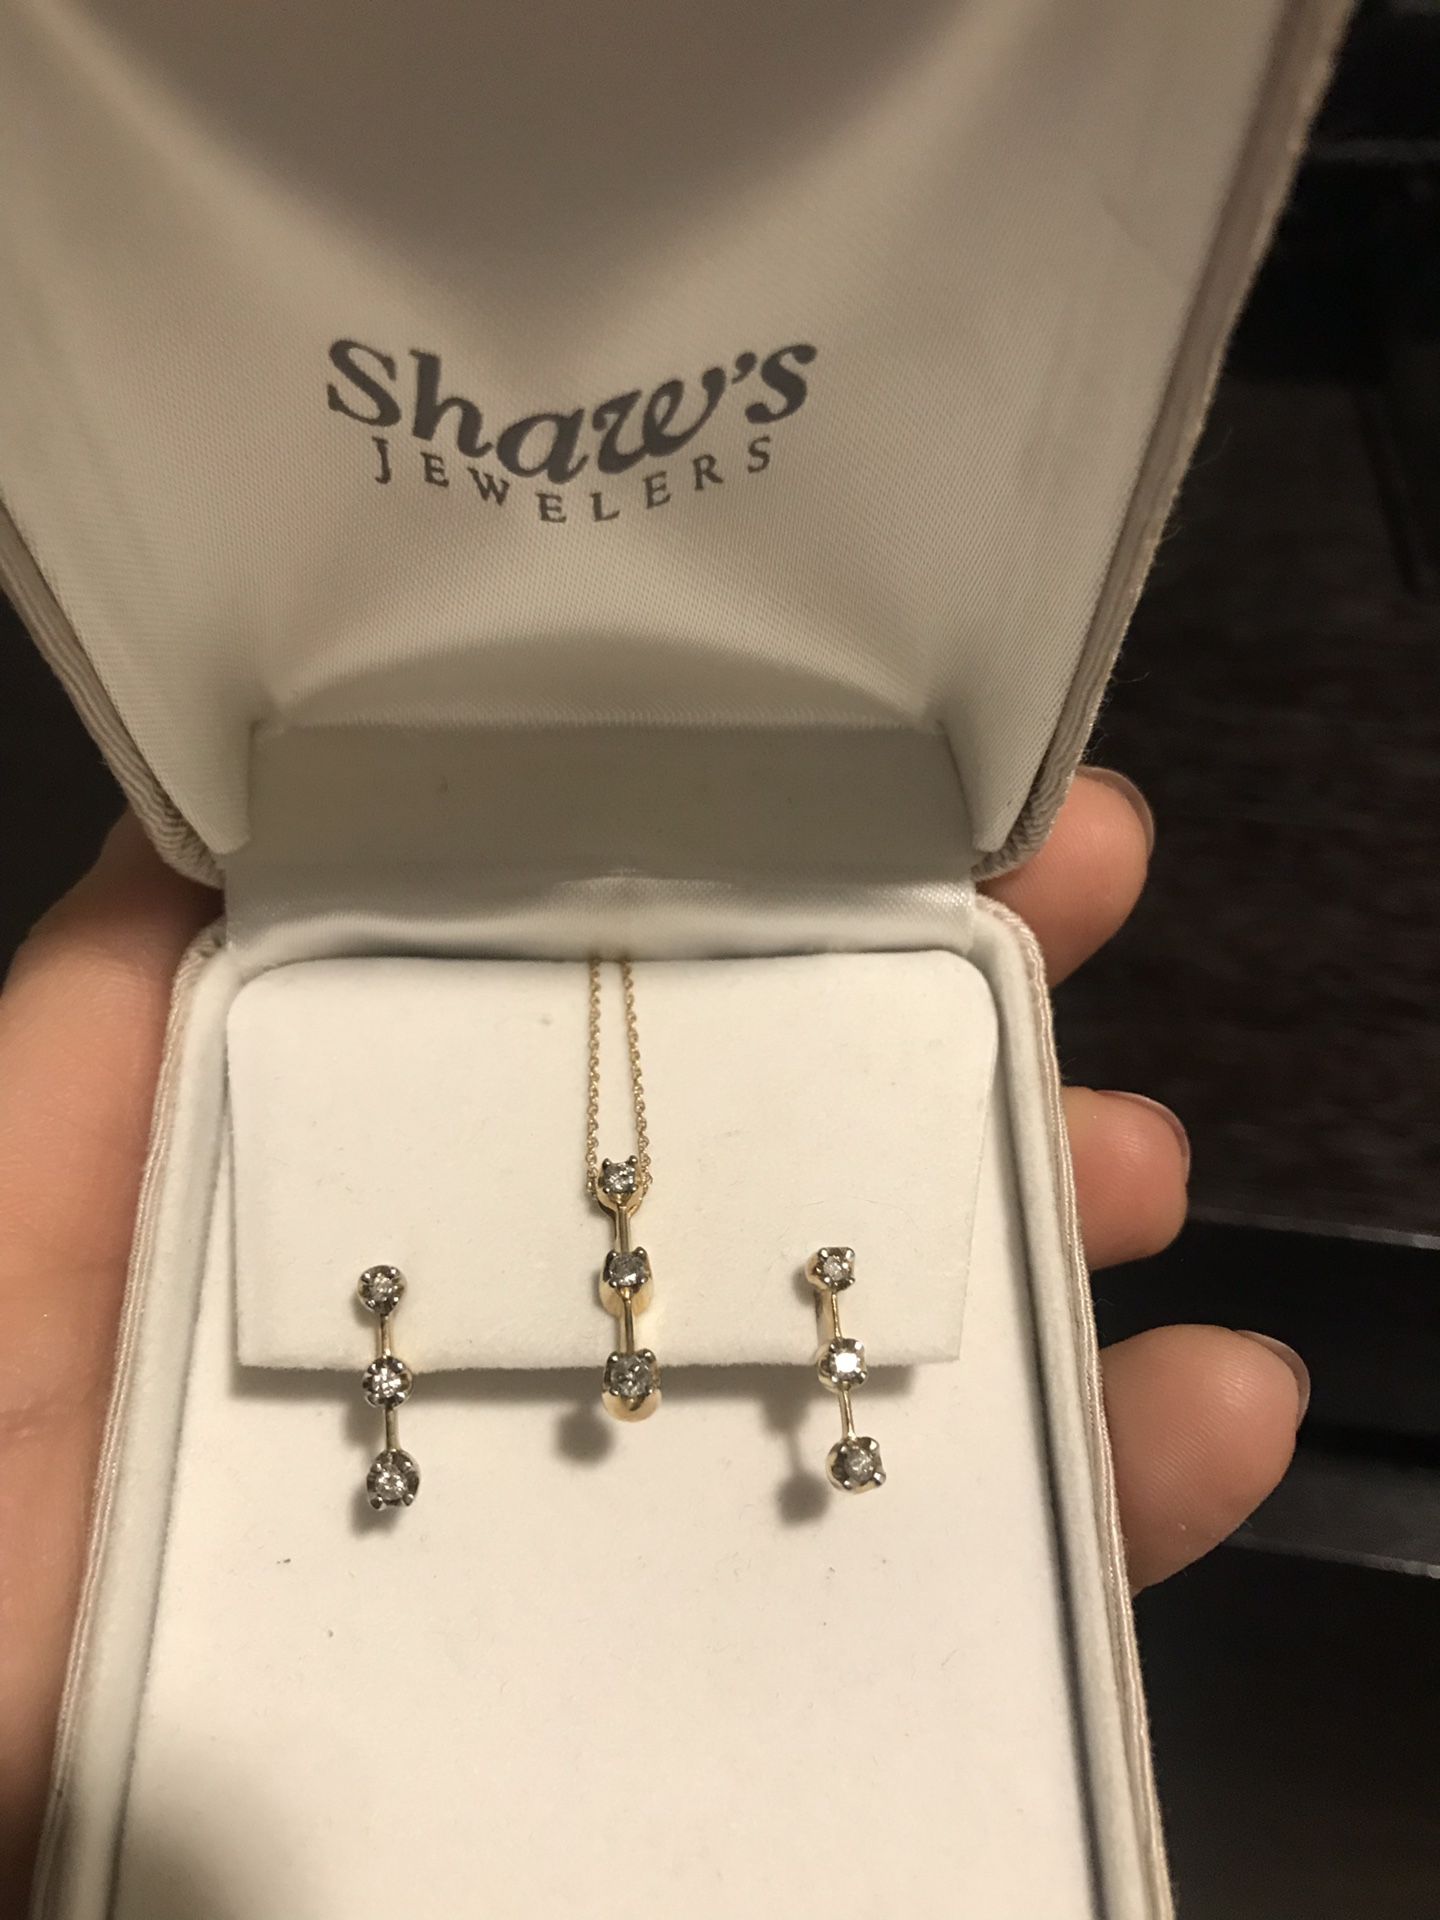 Shaw’s jewelers 14k and diamonds earrings and necklace set